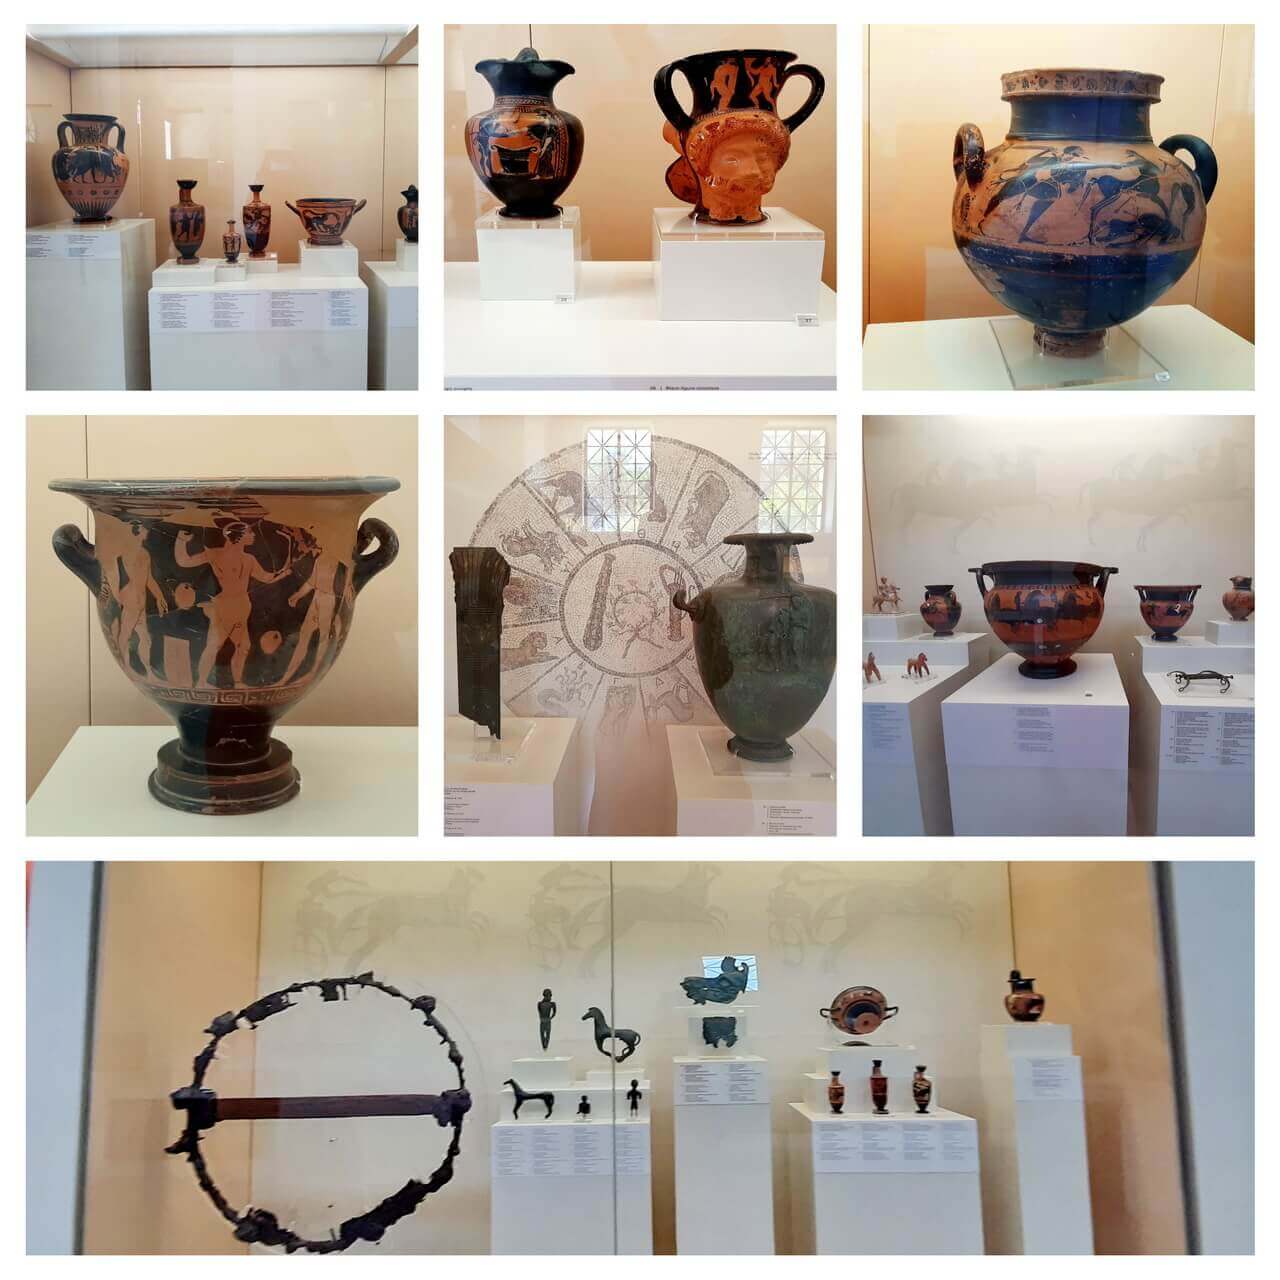 The pottery items, Museum of the history of the Olympic Games